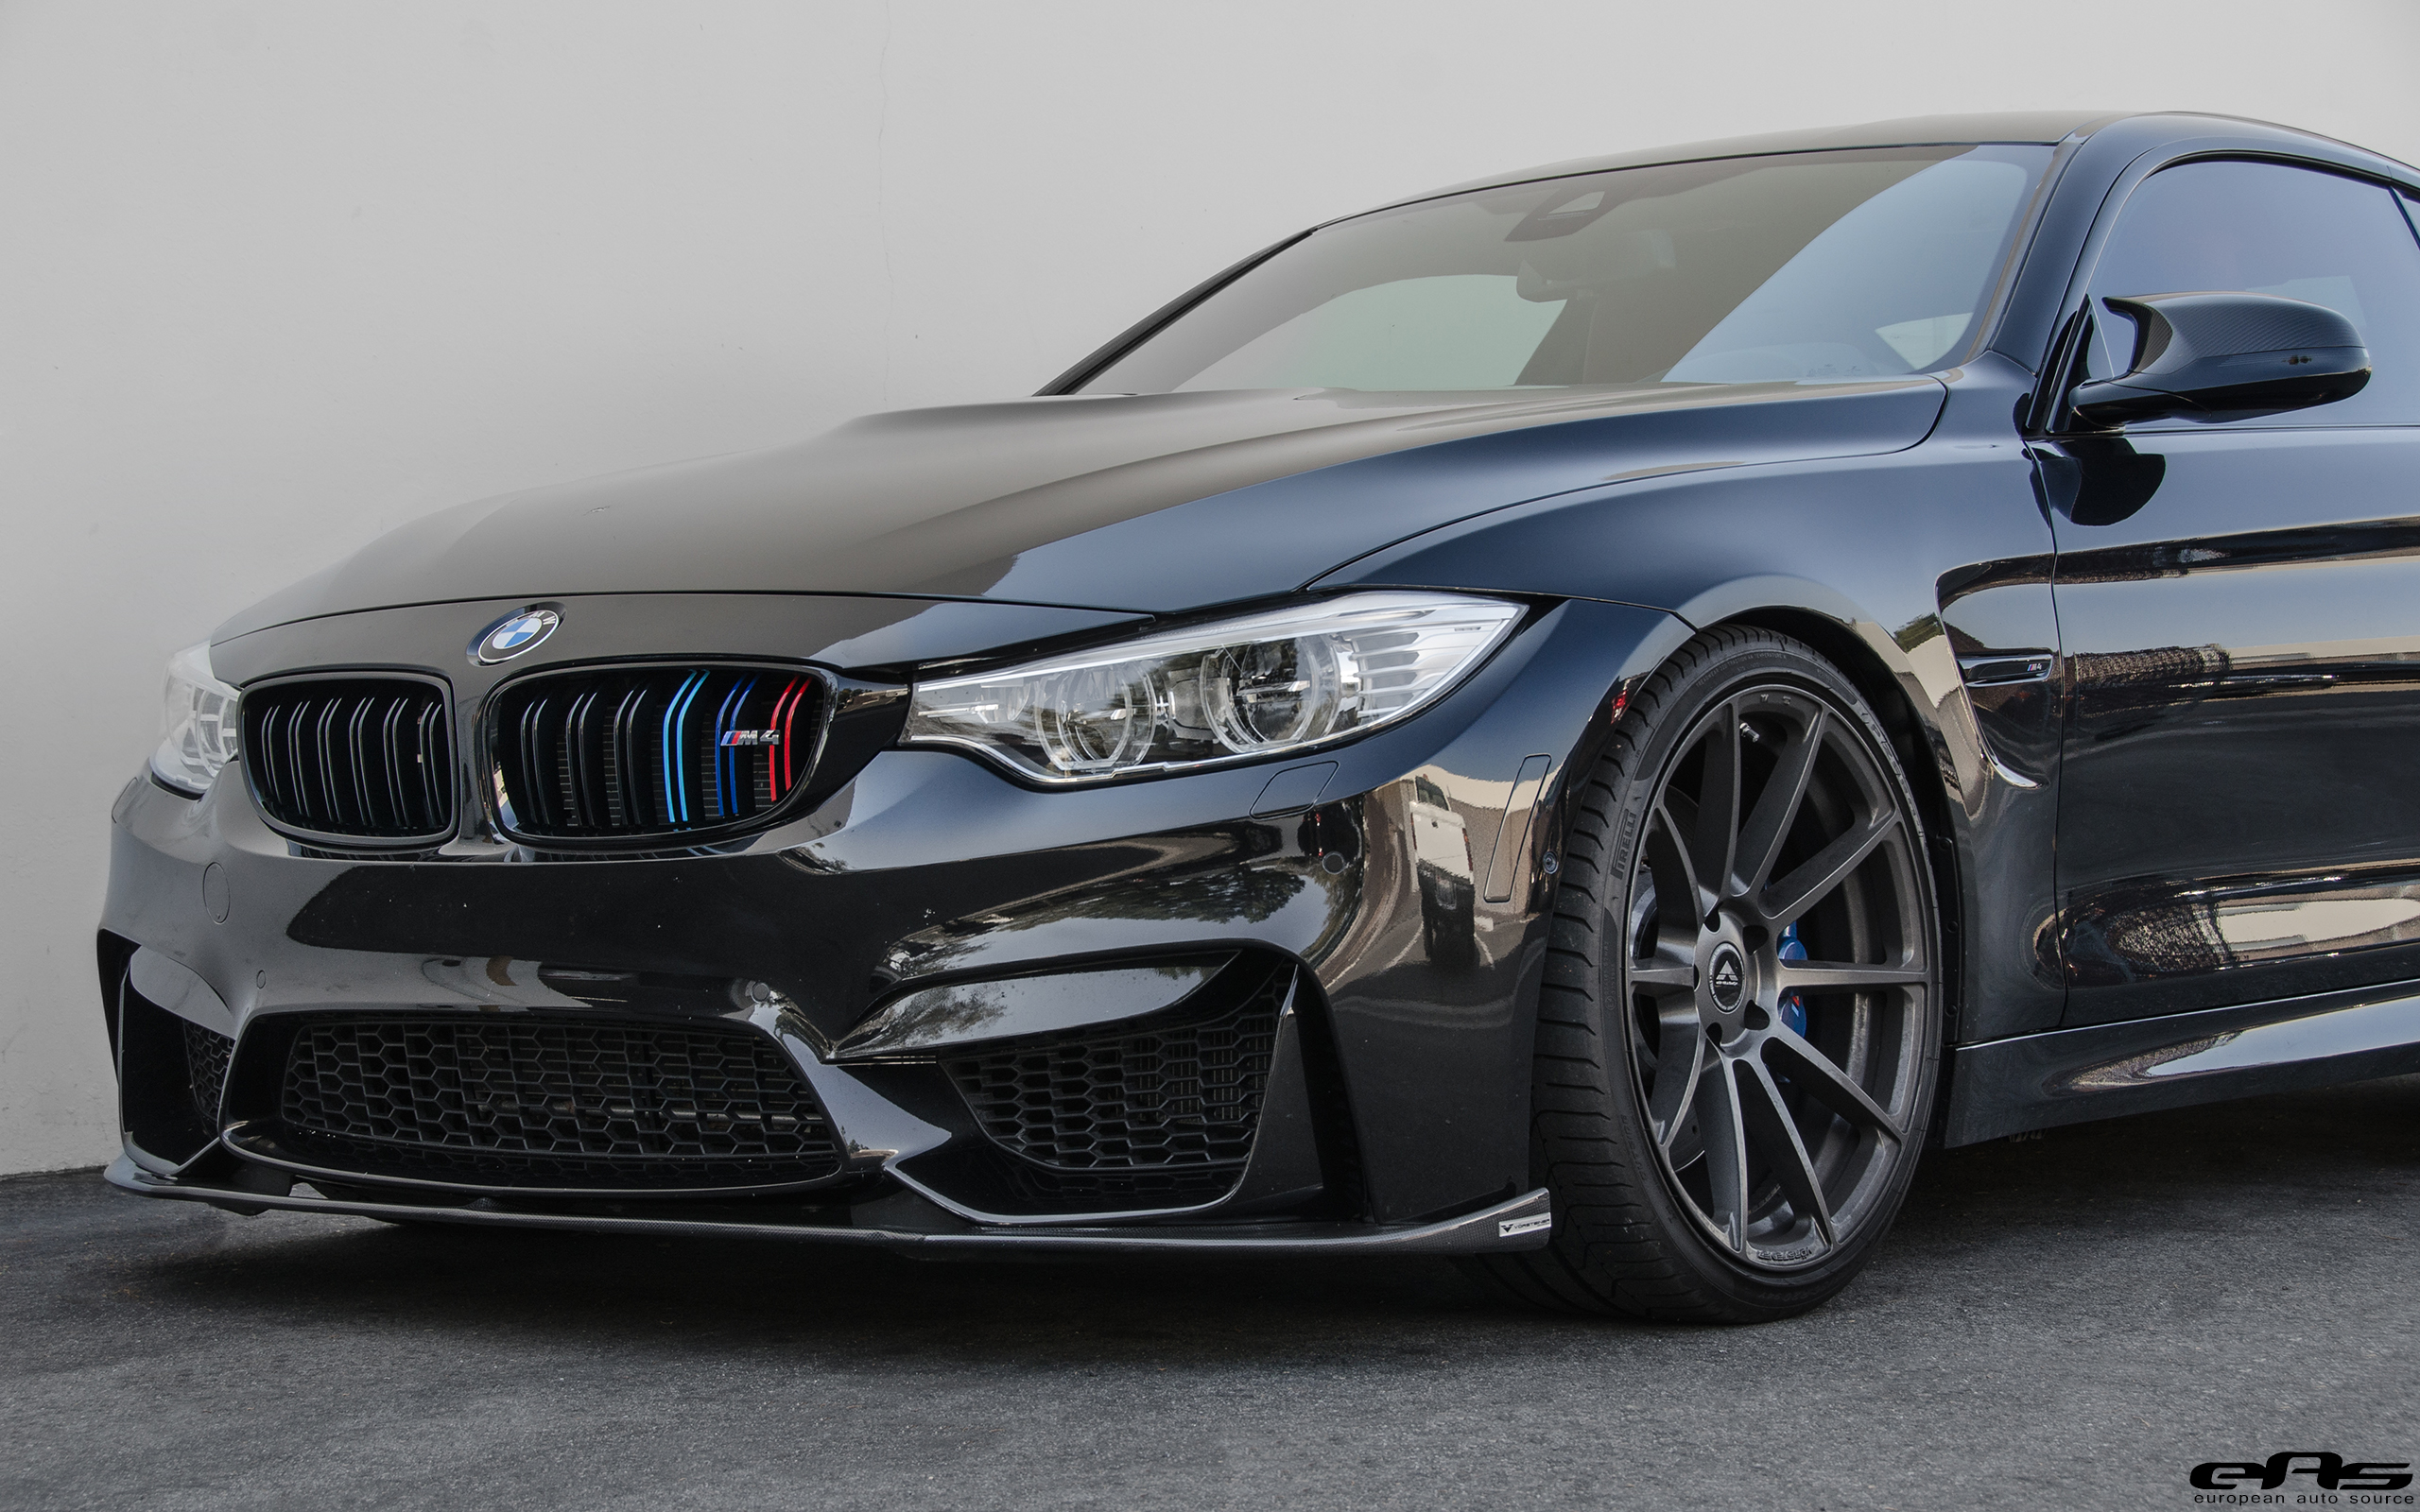 Blacked Out BMW M4 With Vorsteiner Aero Parts And Custom Wheels.